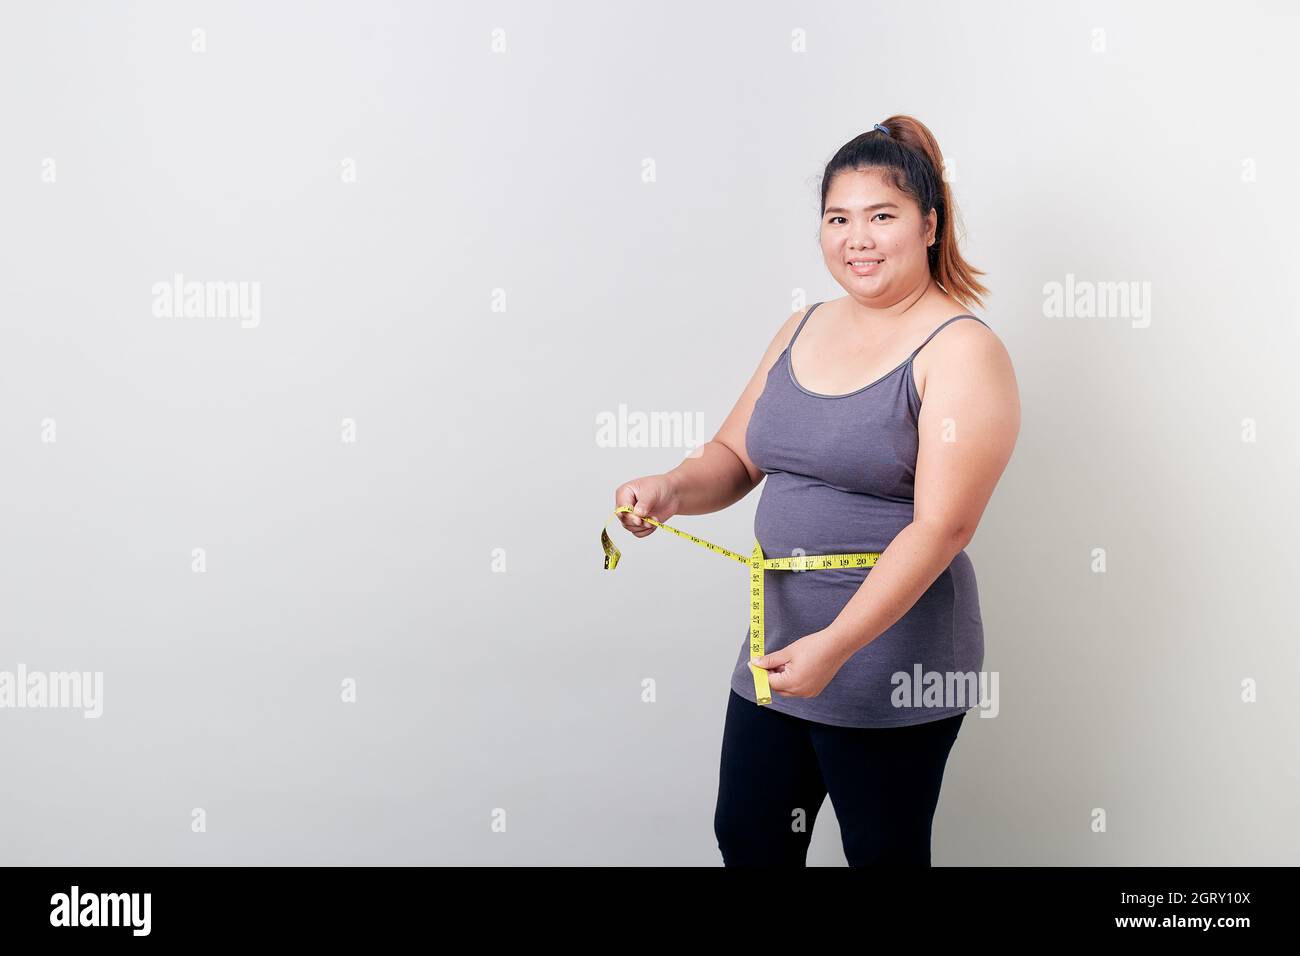 Portrait Of Woman Measuring Waist Against White Background Stock Photo